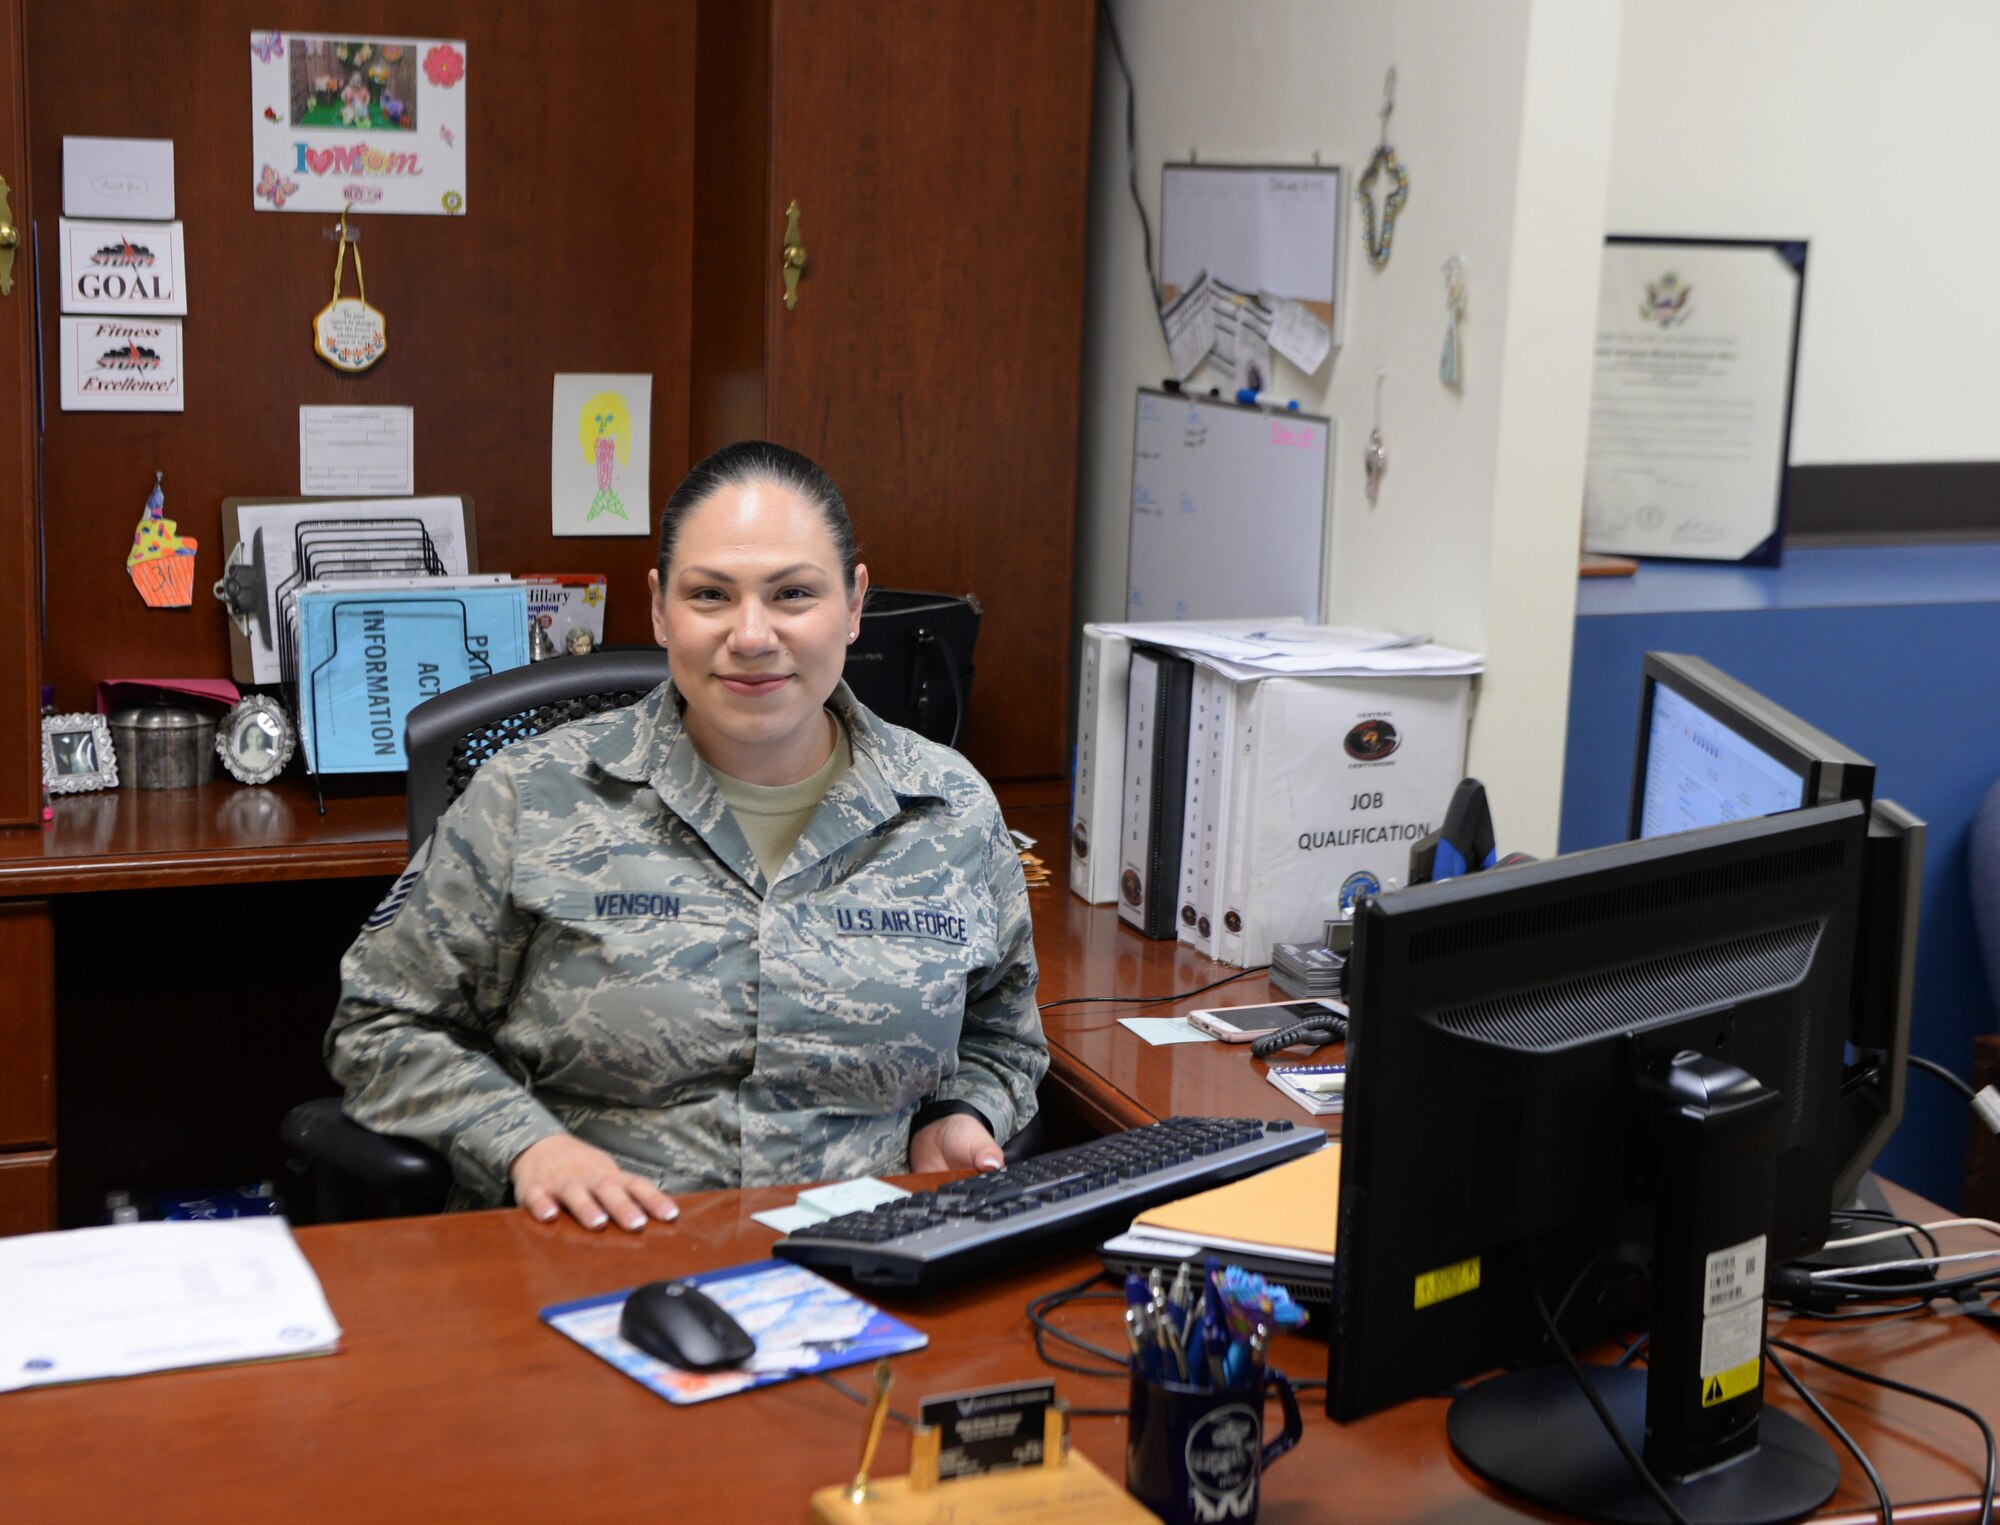 U.S. Air Master Sgt. Brandy Venson, an in-service reserves recruiter assigned to the 97th Air Mobility Wing, sits behind her desk, November 20, 2017, Altus Air Force base, Okla